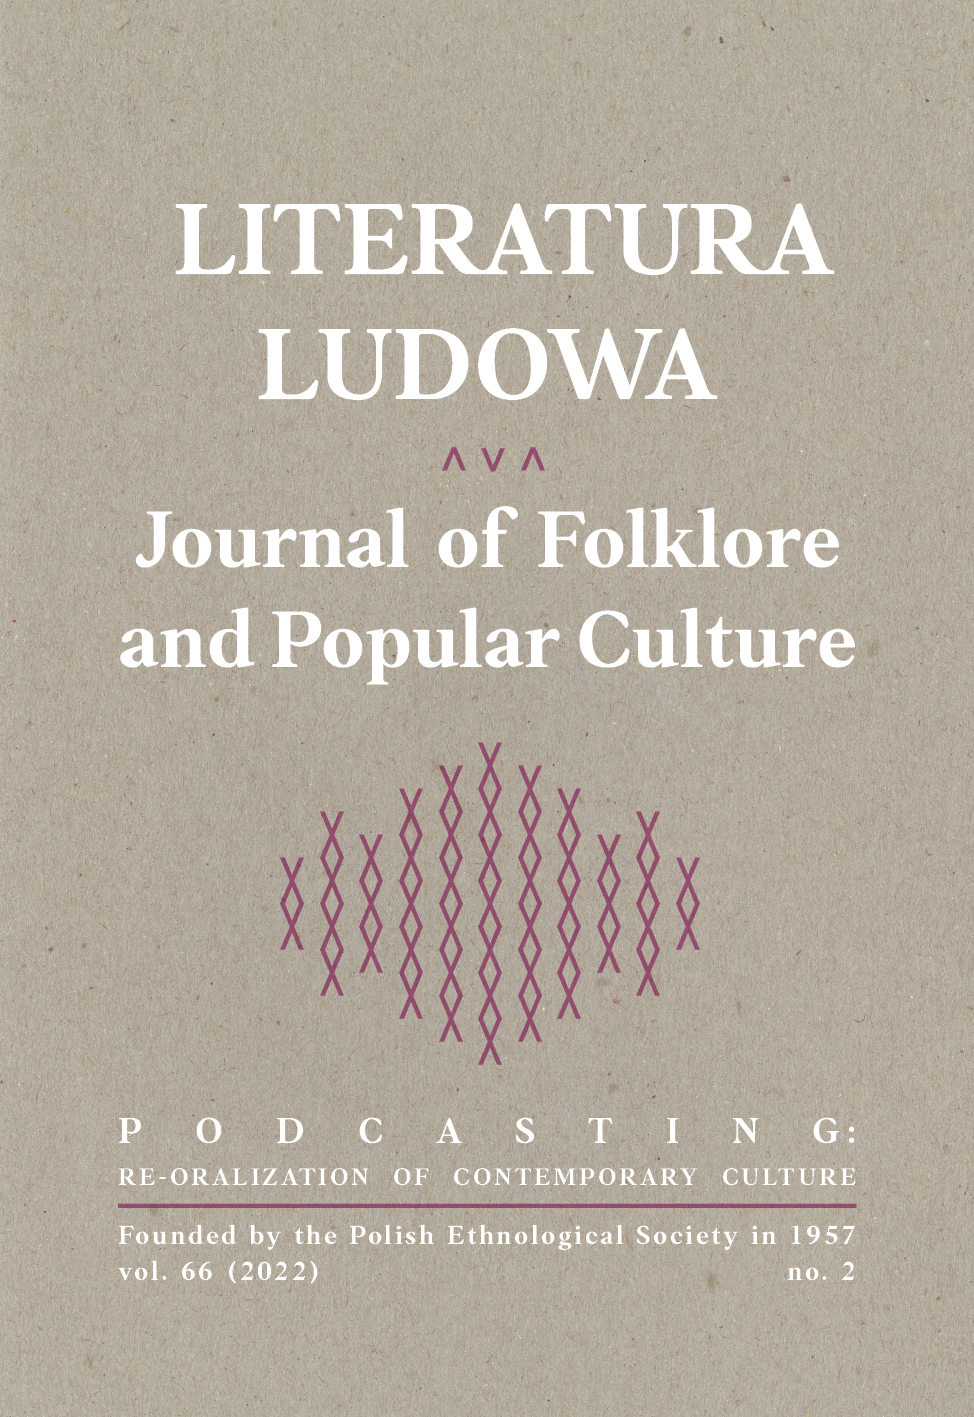 Contemporary Folklore and Podcast Culture: Towards Democratization of Knowledge and Re-Oralization of Culture. A Conversation between Ceallaigh
S. MacCath-Moran and Aldona Kobus